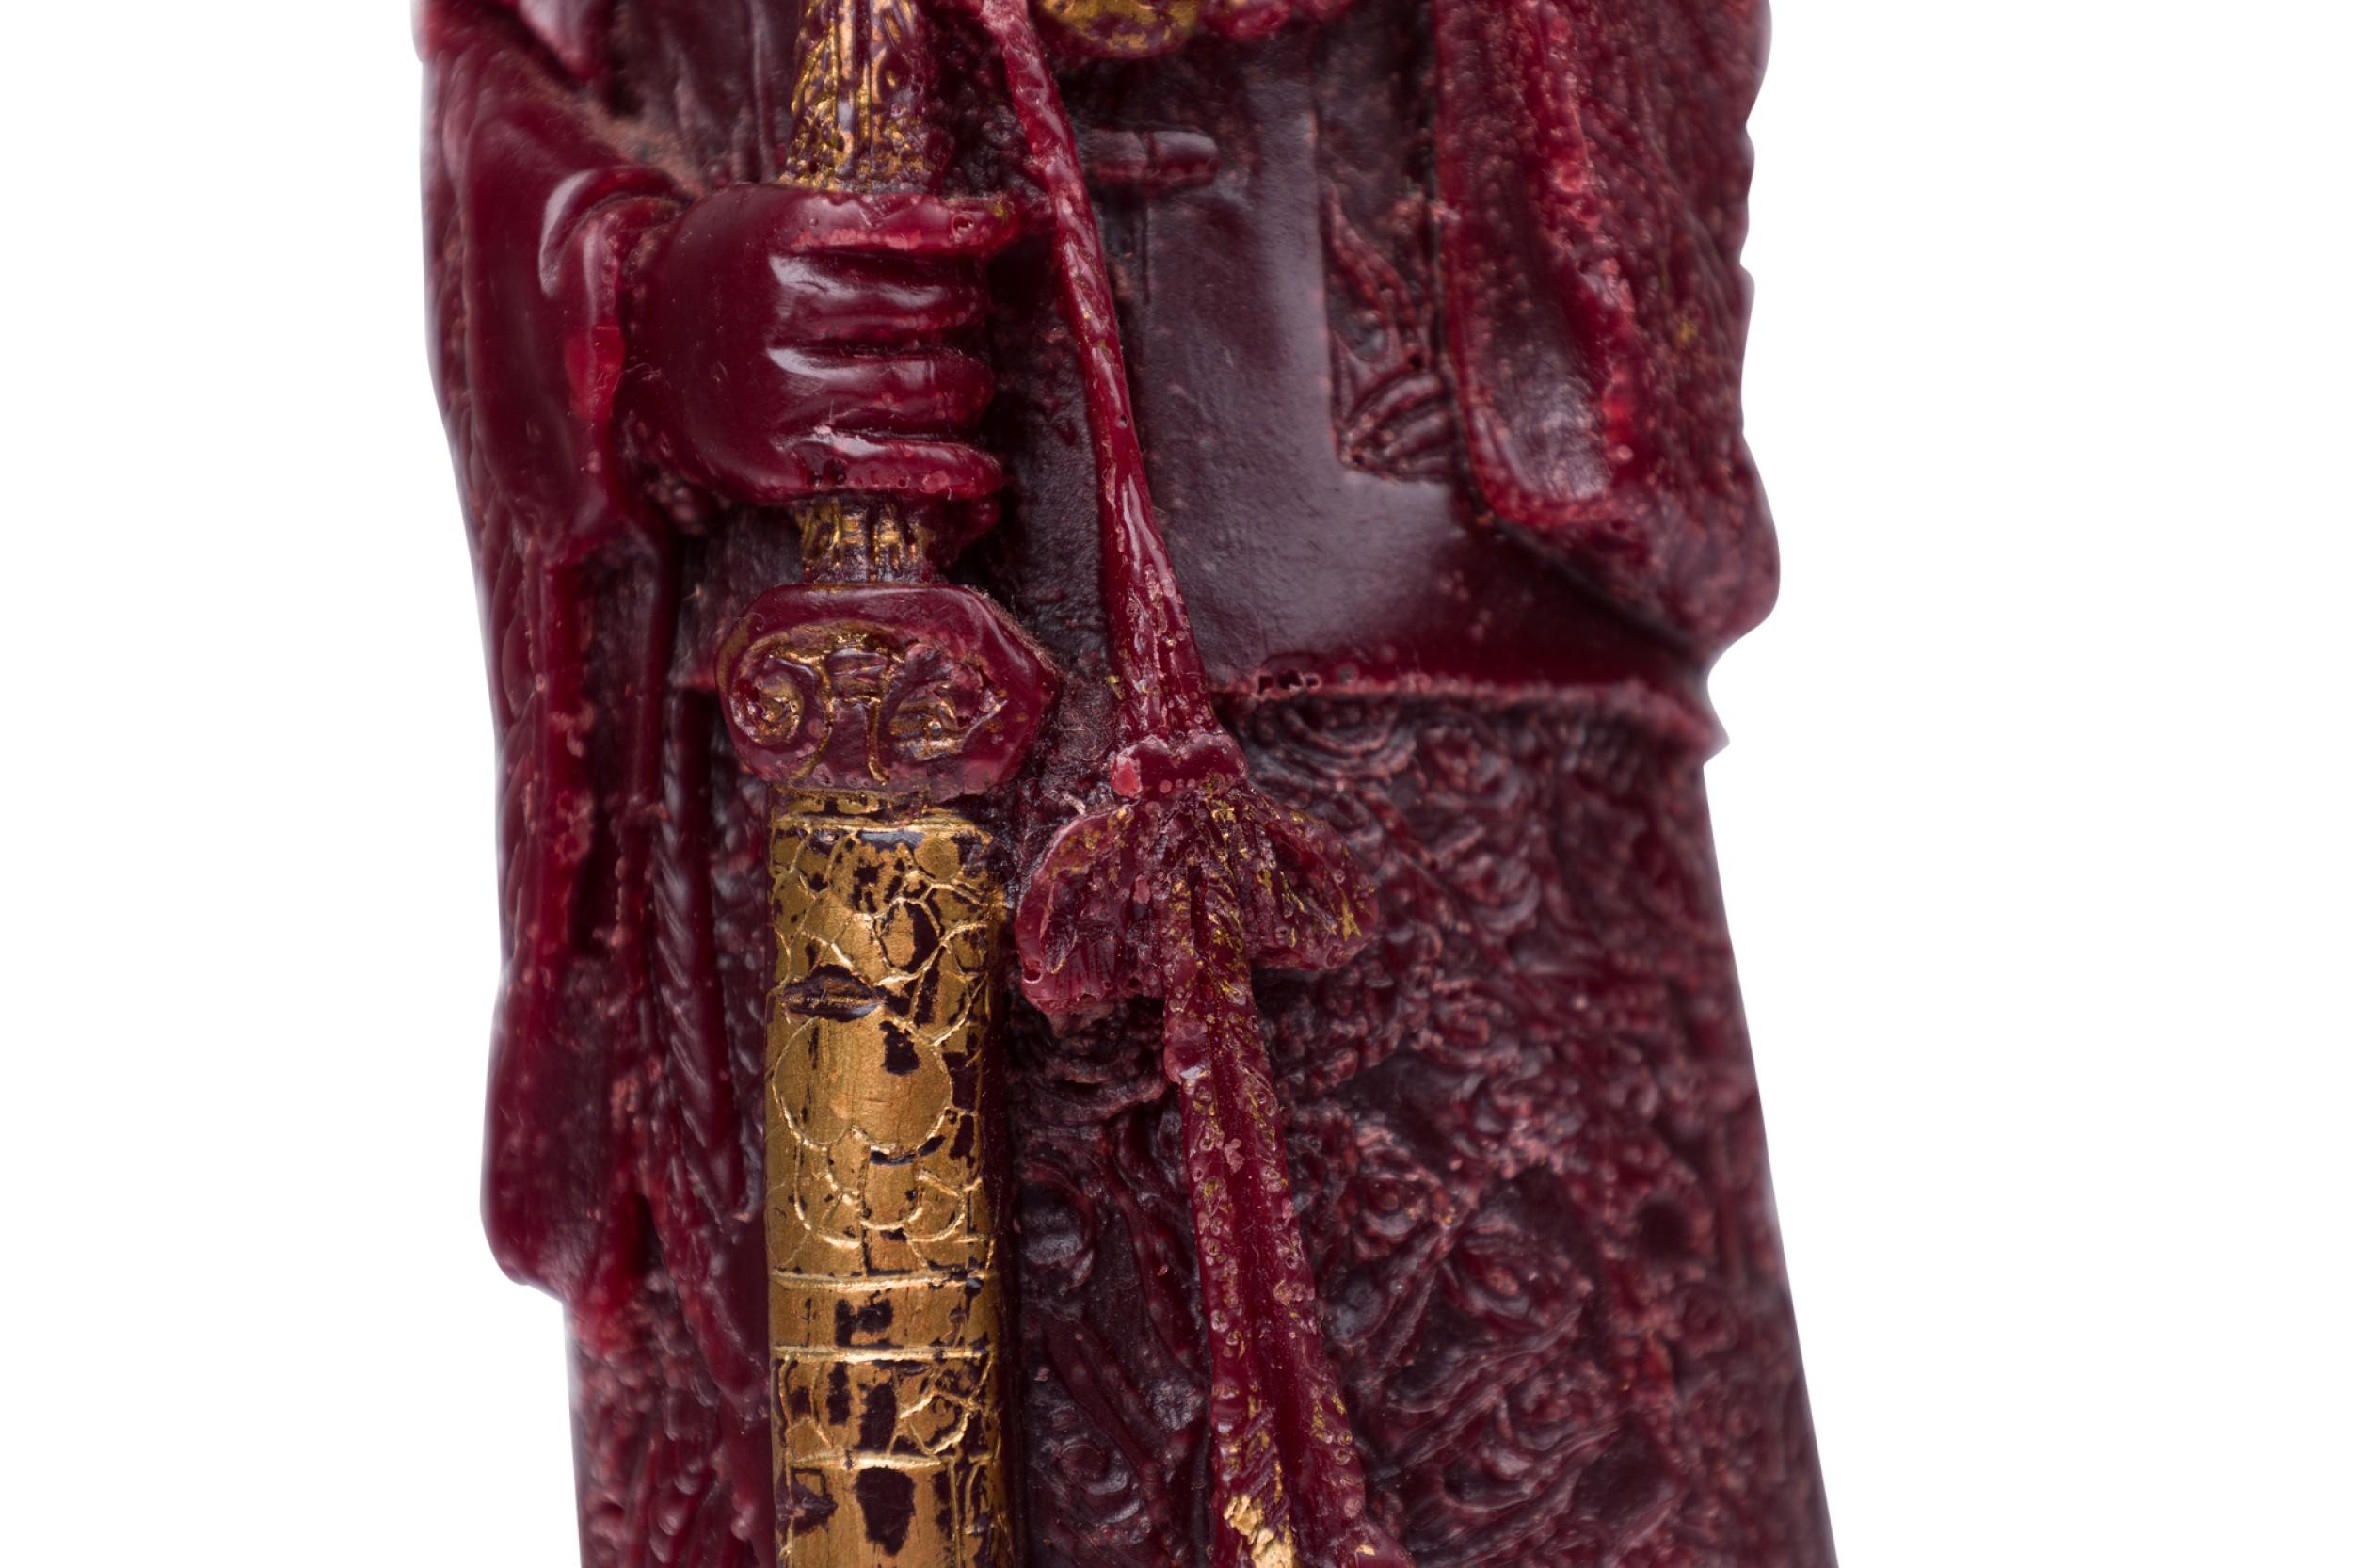 Chinese wax figure molded in a reddish-brown shade with gilt highlights depicts a robed emperor leaning slightly back, his left hand stroking his beard, right arm grasping a sheathed sword with hanging sash.
 

 Some wear and gilt losses
